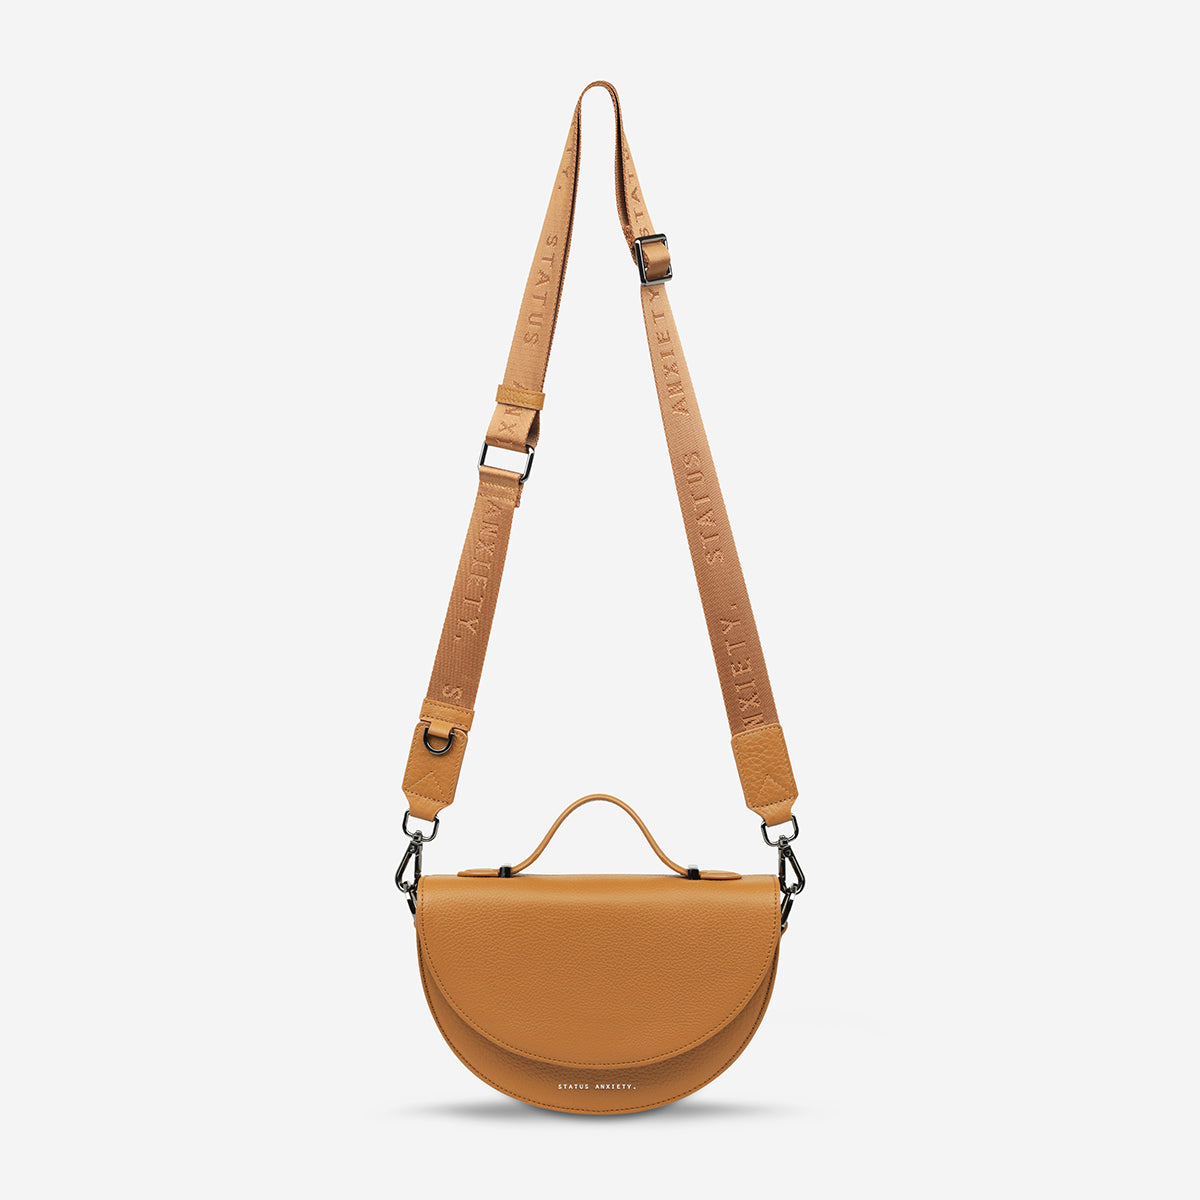 Status Anxiety - All Nighter Bag w. Webbed Strap - Tan